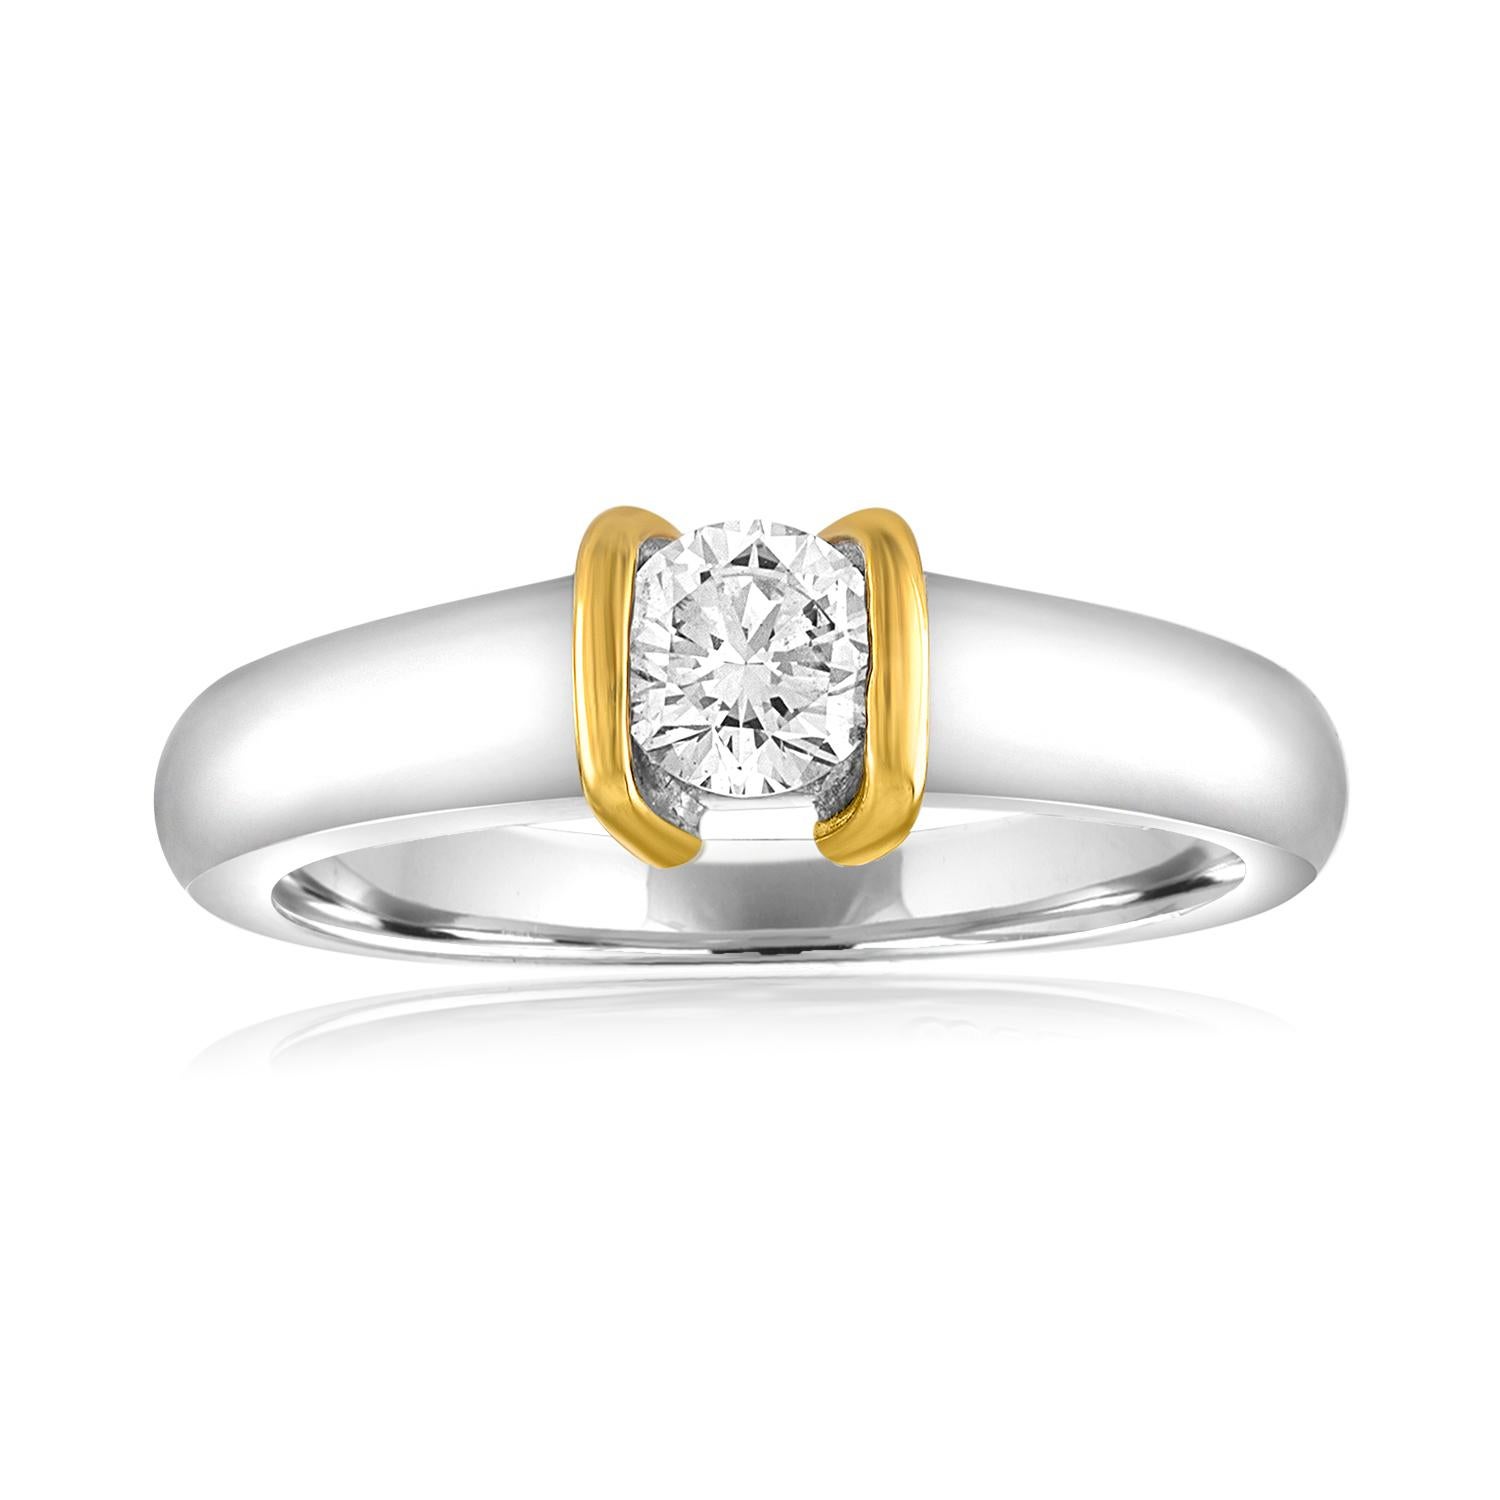 Diamond Gold Engagement Band Set
The set is 18K White & Yellow Gold
The Center Stone is 0.35 Carats F VS
The rings were made in UK, it has English Marks
The rings are a size 5, sizable
The rings weigh 7.1 grams
The set cannot be broken up.